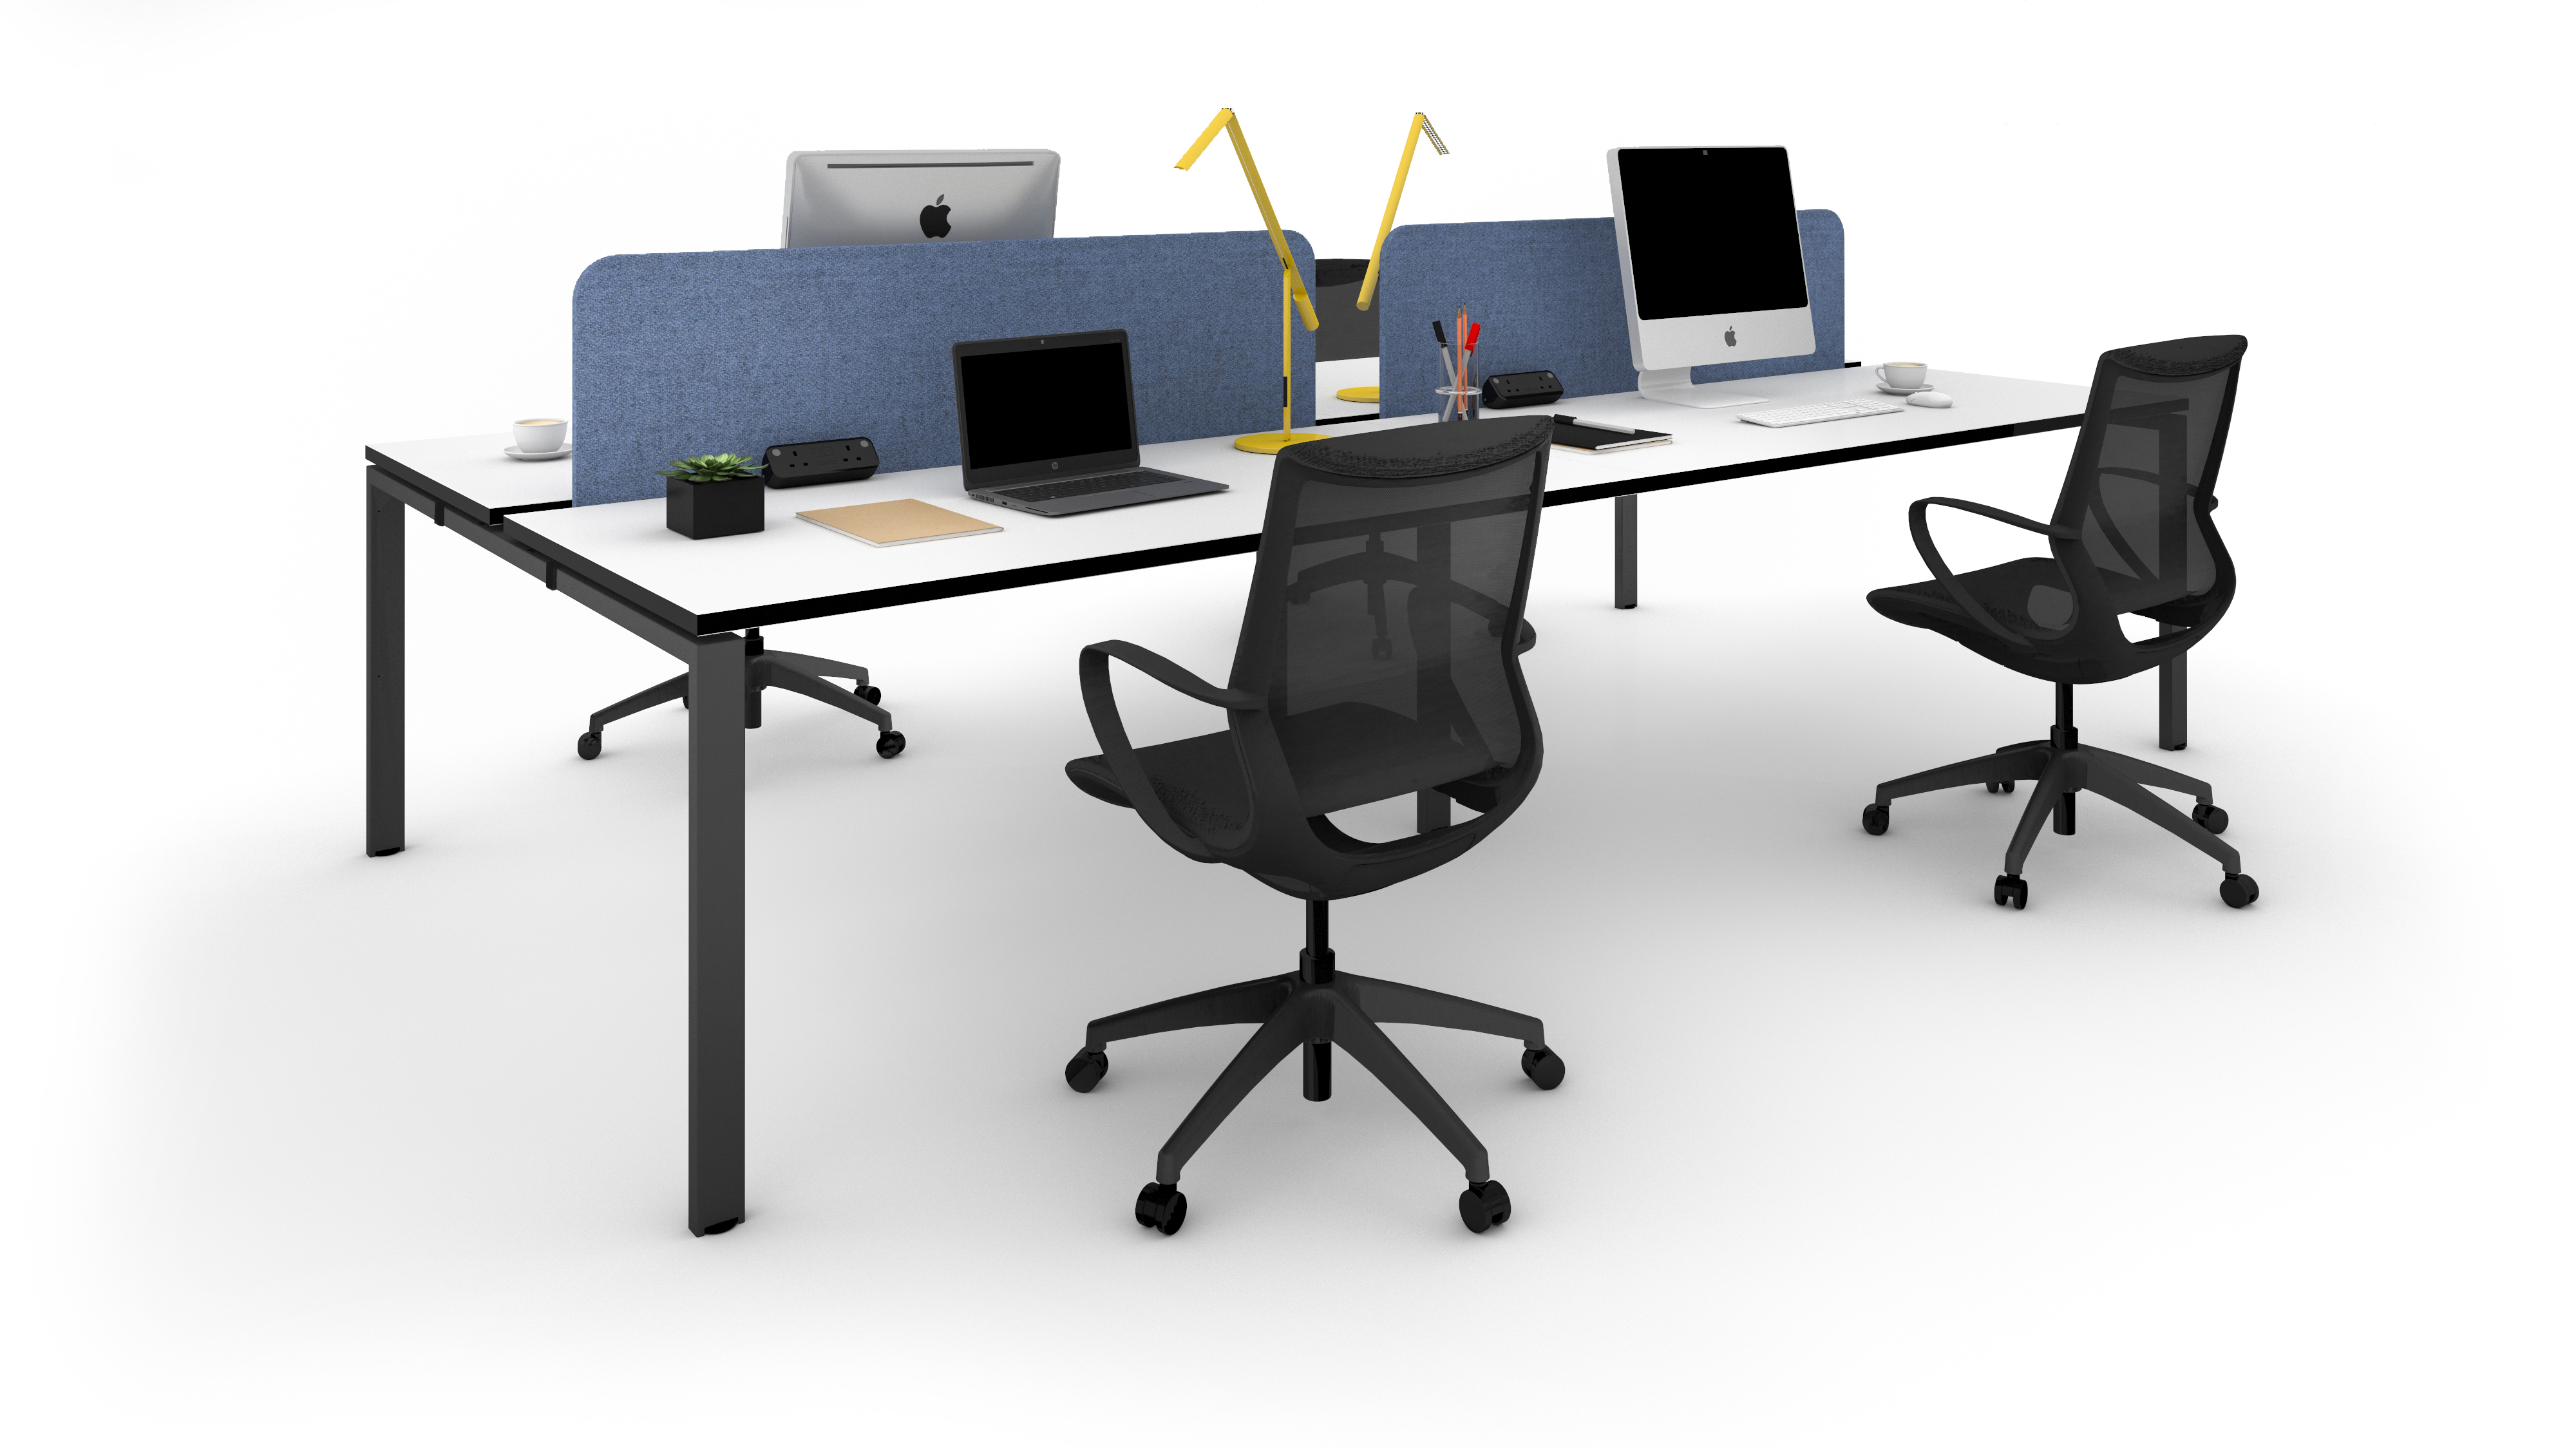 WS - Rail desk - 4pers - Black frame, White top with black edge, Dressed